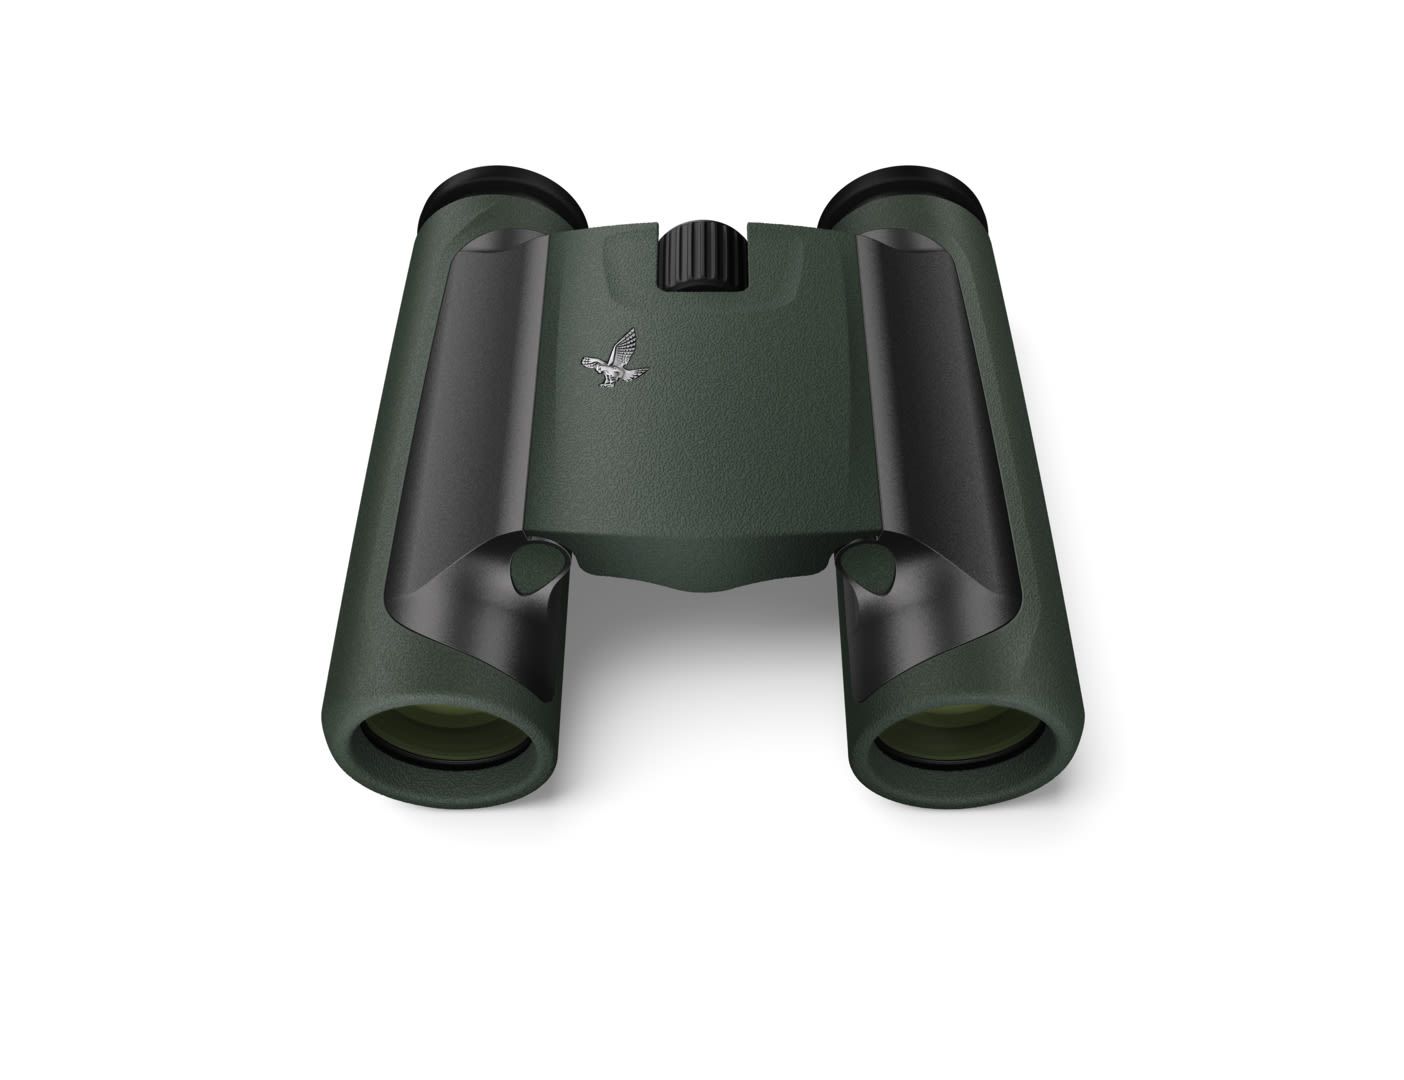 Swarovski CL 10x25 Pocket Binoculars Green with Mountain Accessory Pack - Product Photo 5 - Front view with a top down perspective of the binoculars